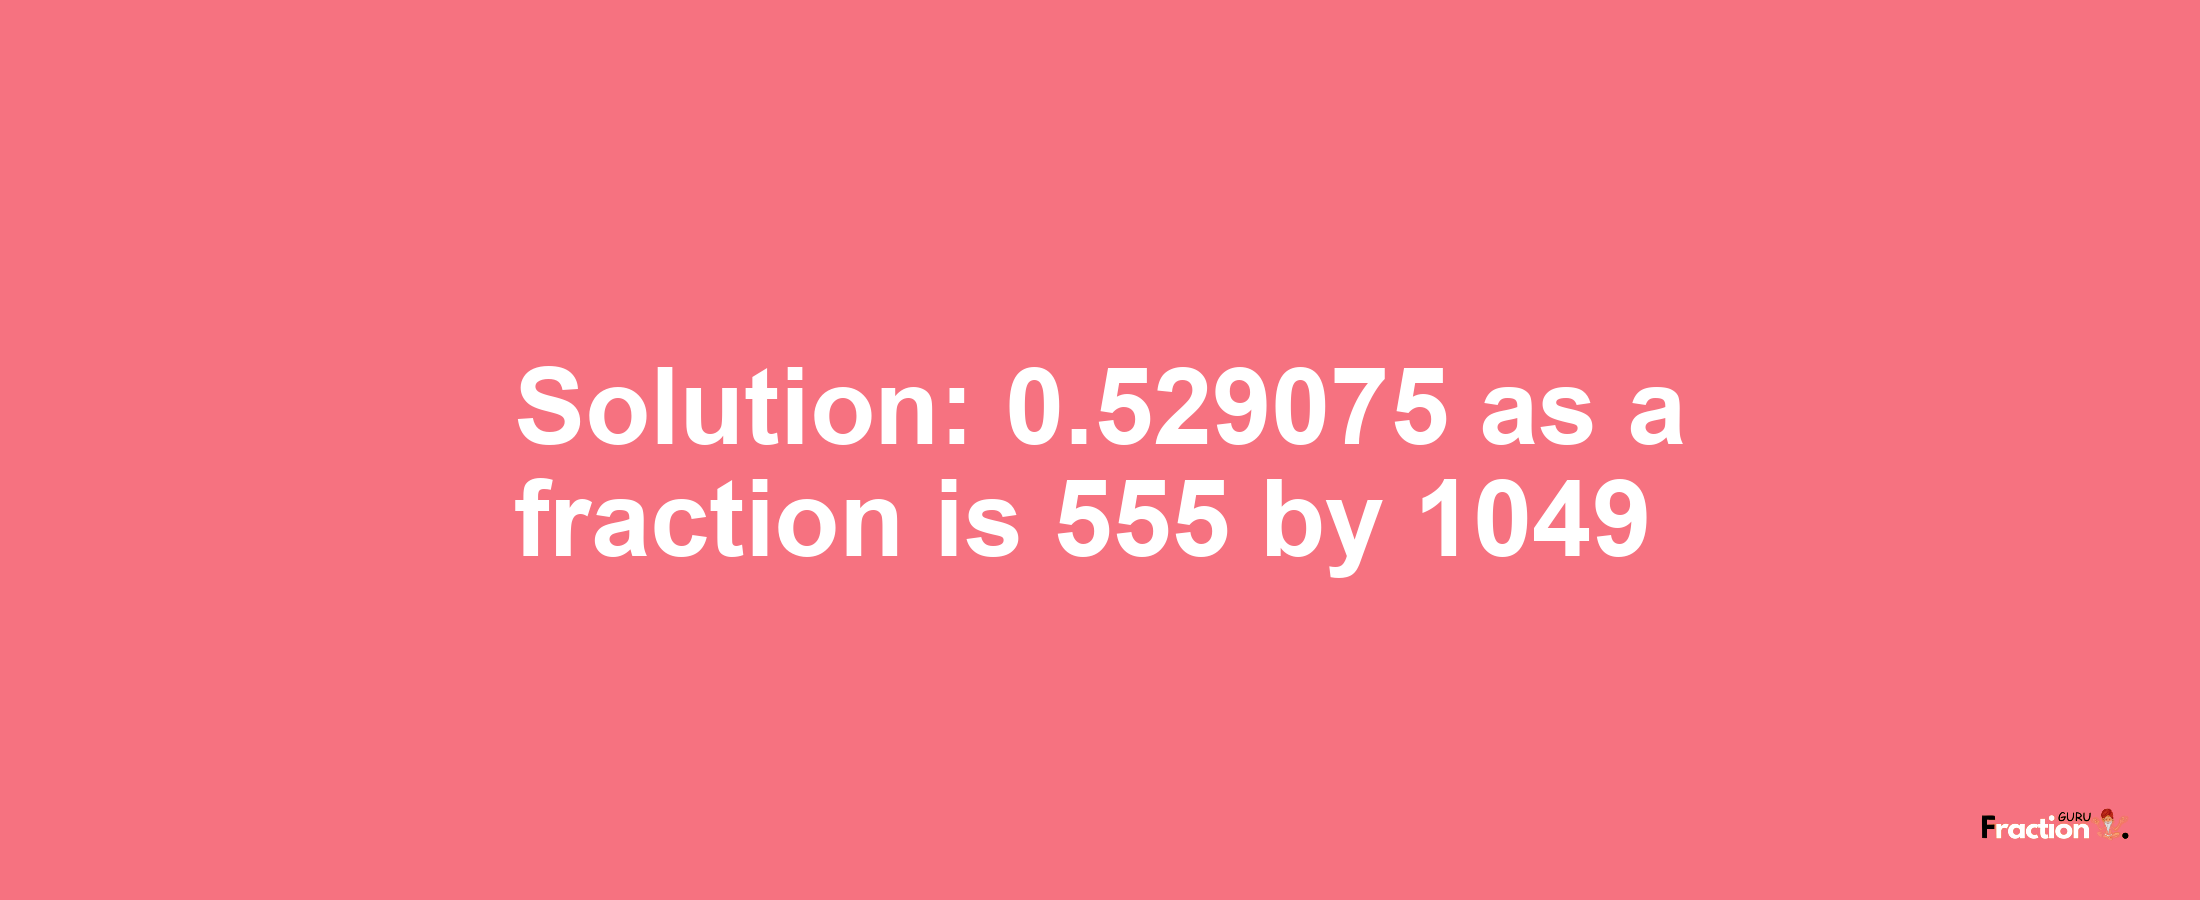 Solution:0.529075 as a fraction is 555/1049